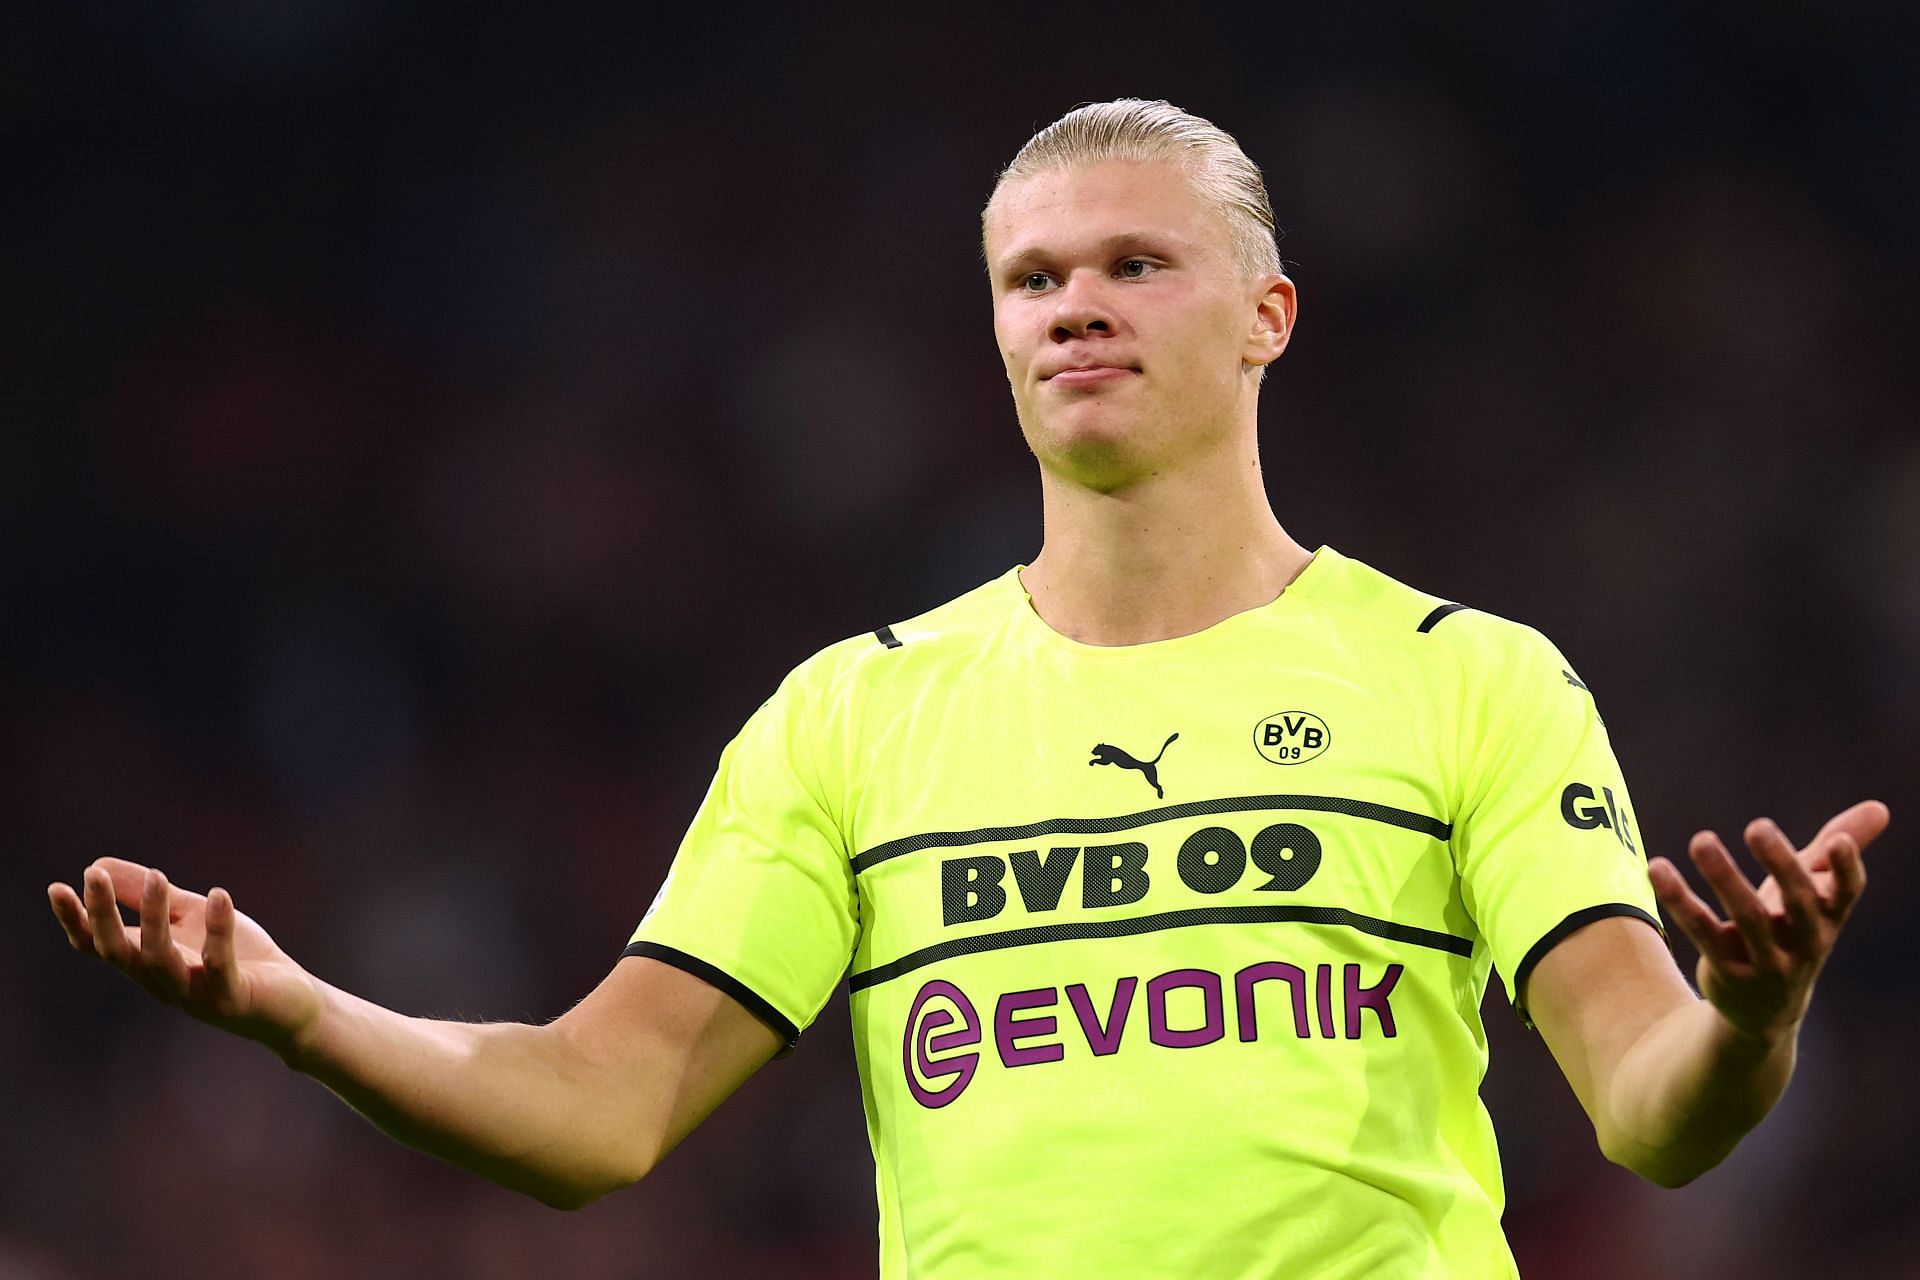 Erling Haaland has been on a tear since joining Borussia Dortmund.